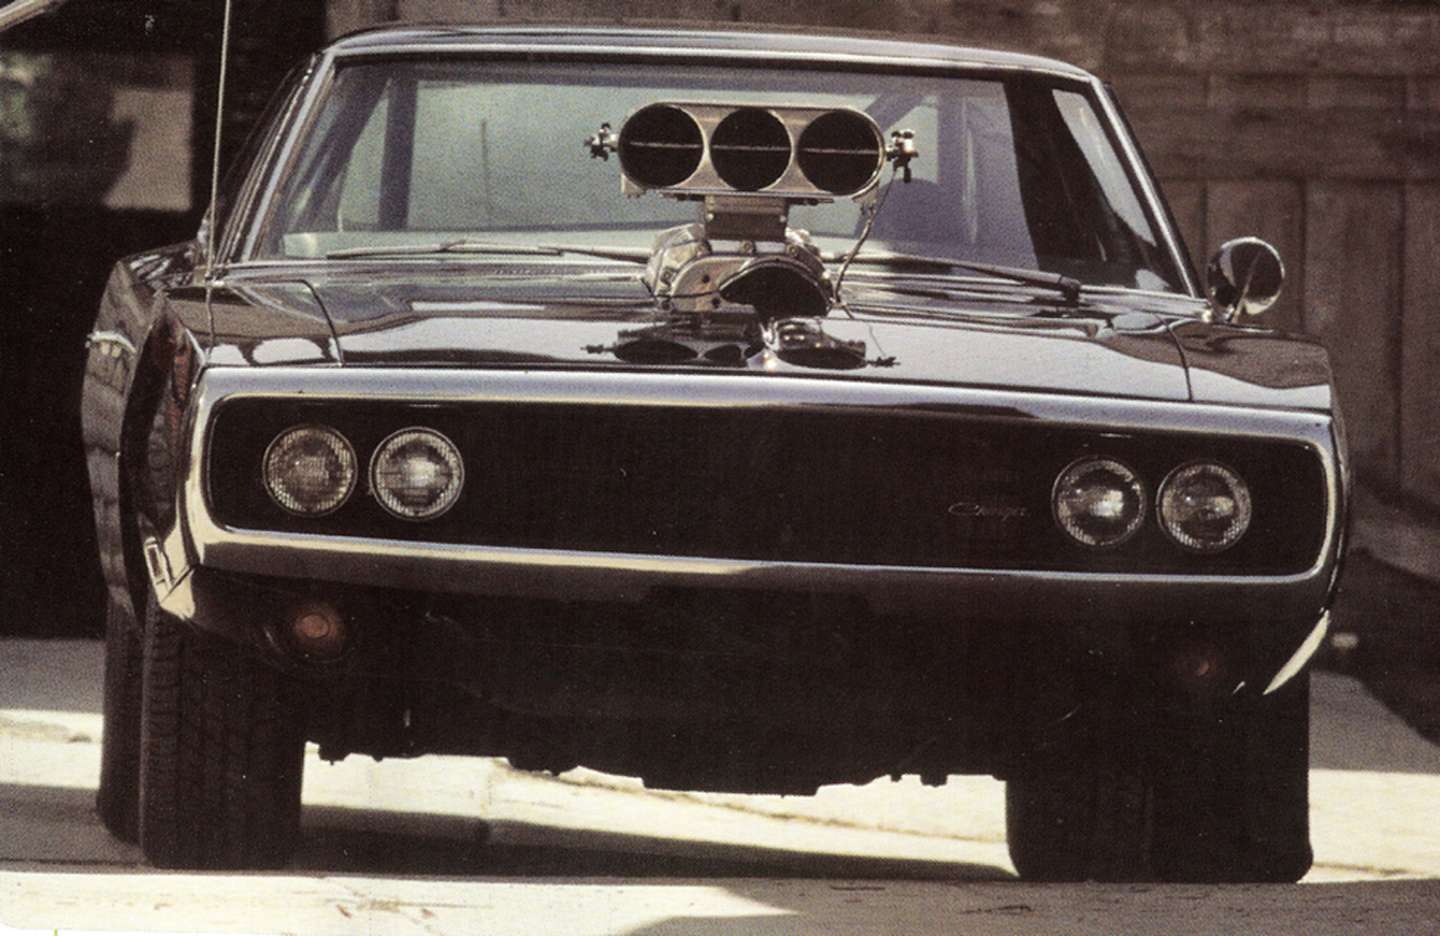 Dodge_Charger